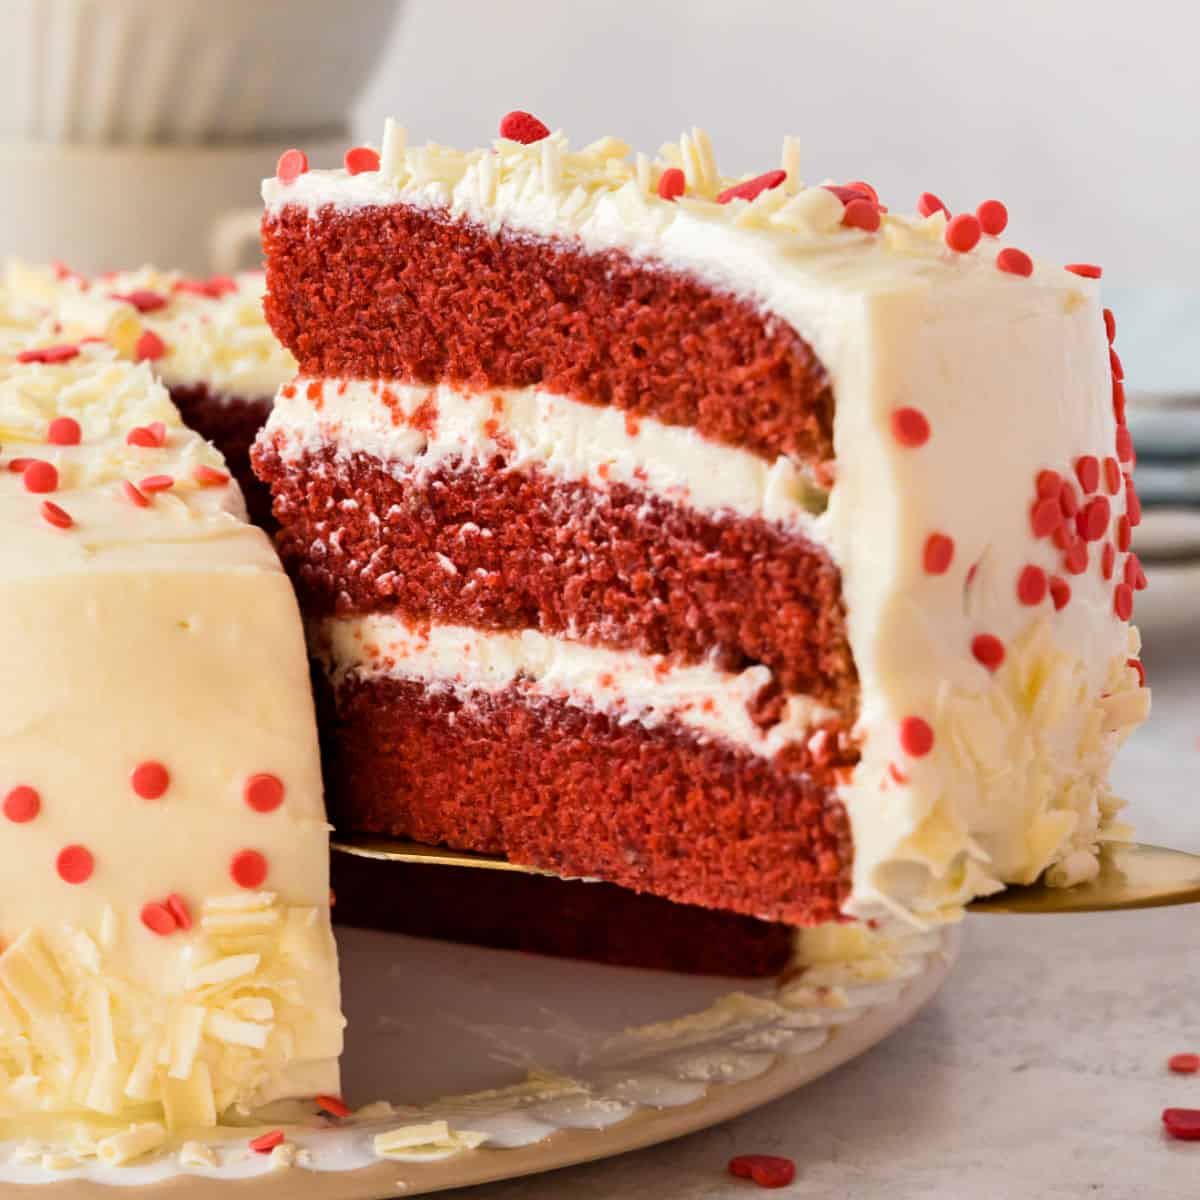 How to Make The Real Red Velvet Cake with NO Food Coloring | Smart Cookie |  Allrecipes.com - YouTube